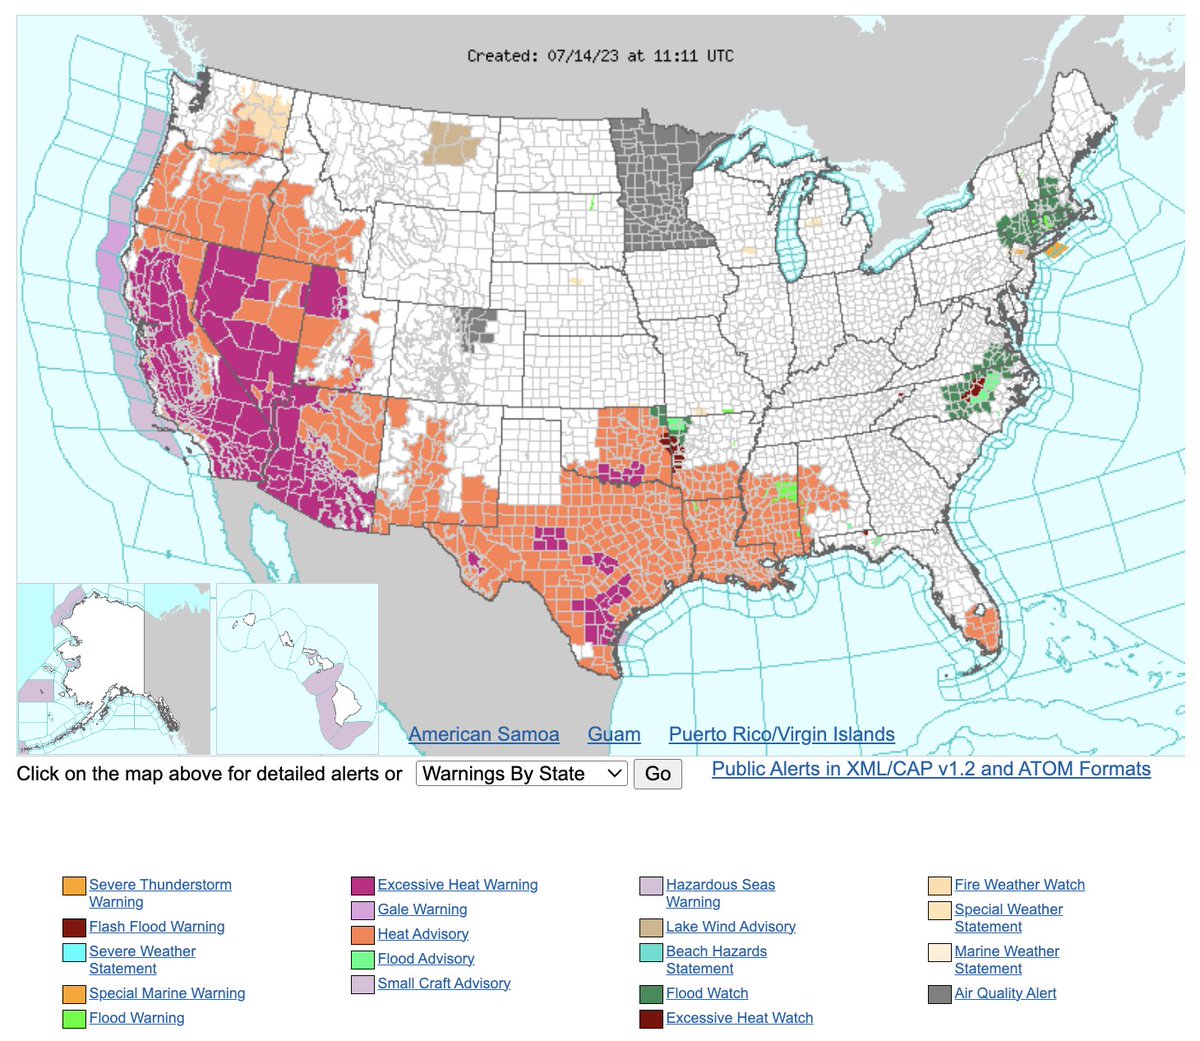 #Heat related warnings cover large portions of the southern and western U.S. this morning, while air quality alerts are in effect in #Minnesota. 

View all U.S. weather hazards here: https://t.co/2Ao7ryR5hf https://t.co/LsCzdRls61